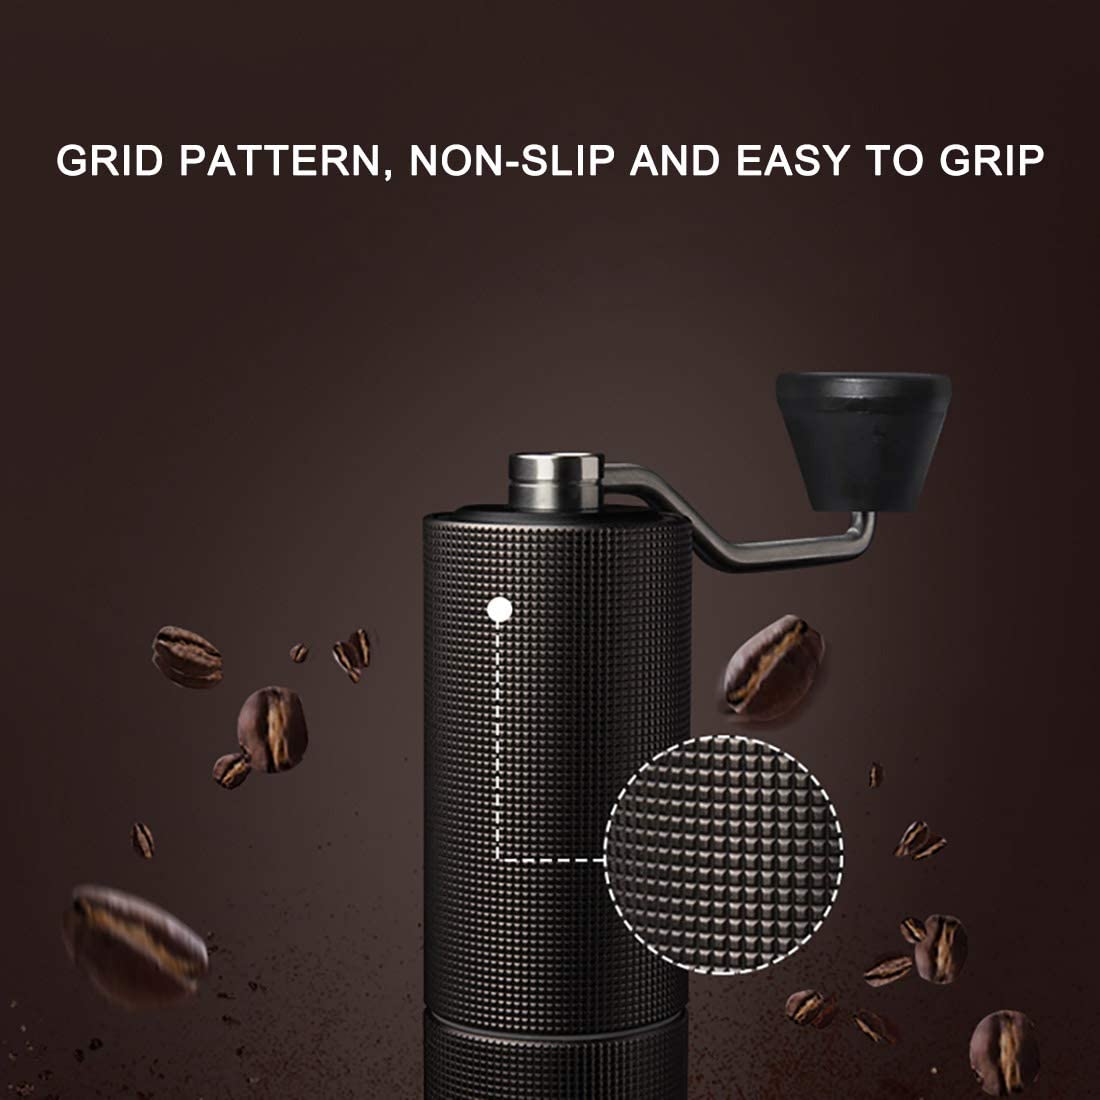 TIMEMORE Chestnut C2 Manual Coffee Grinder Capacity 25g with CNC Stainless Steel Conical Burr - image 4 of 9